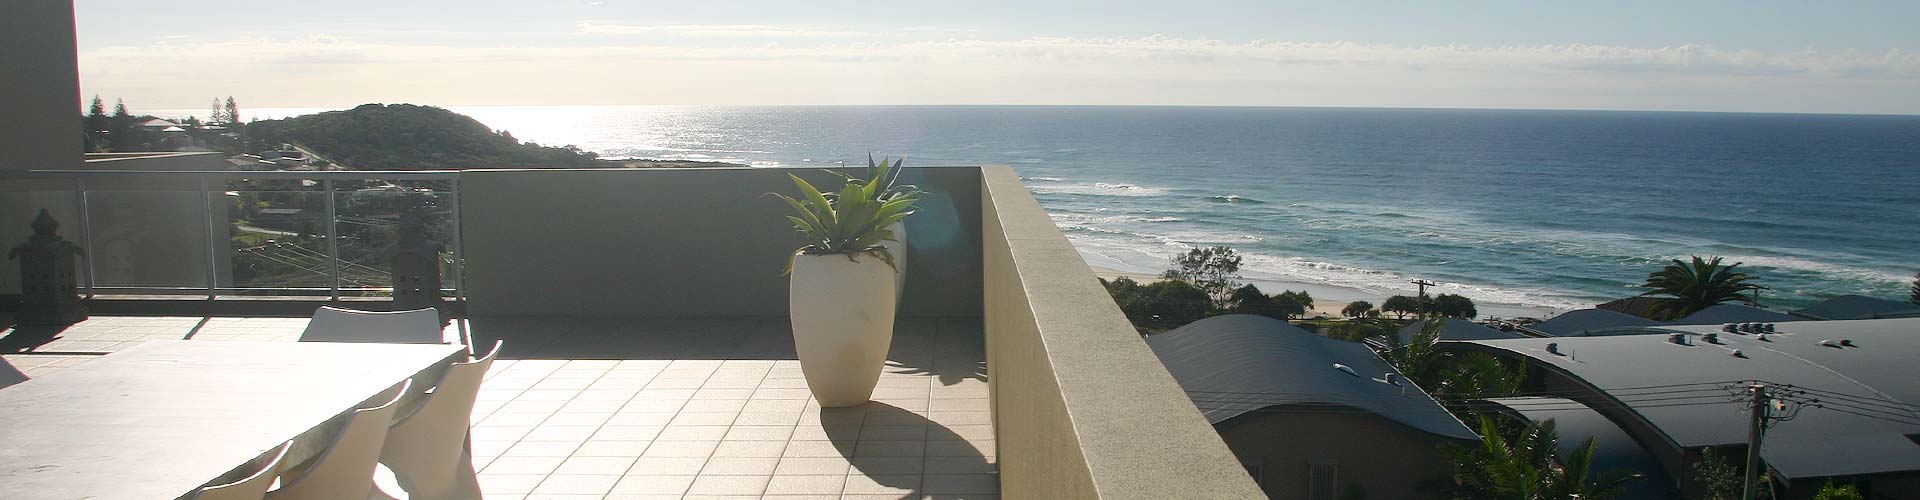 Grandview Apartments Ballina - Coogee Beach Accommodation 5